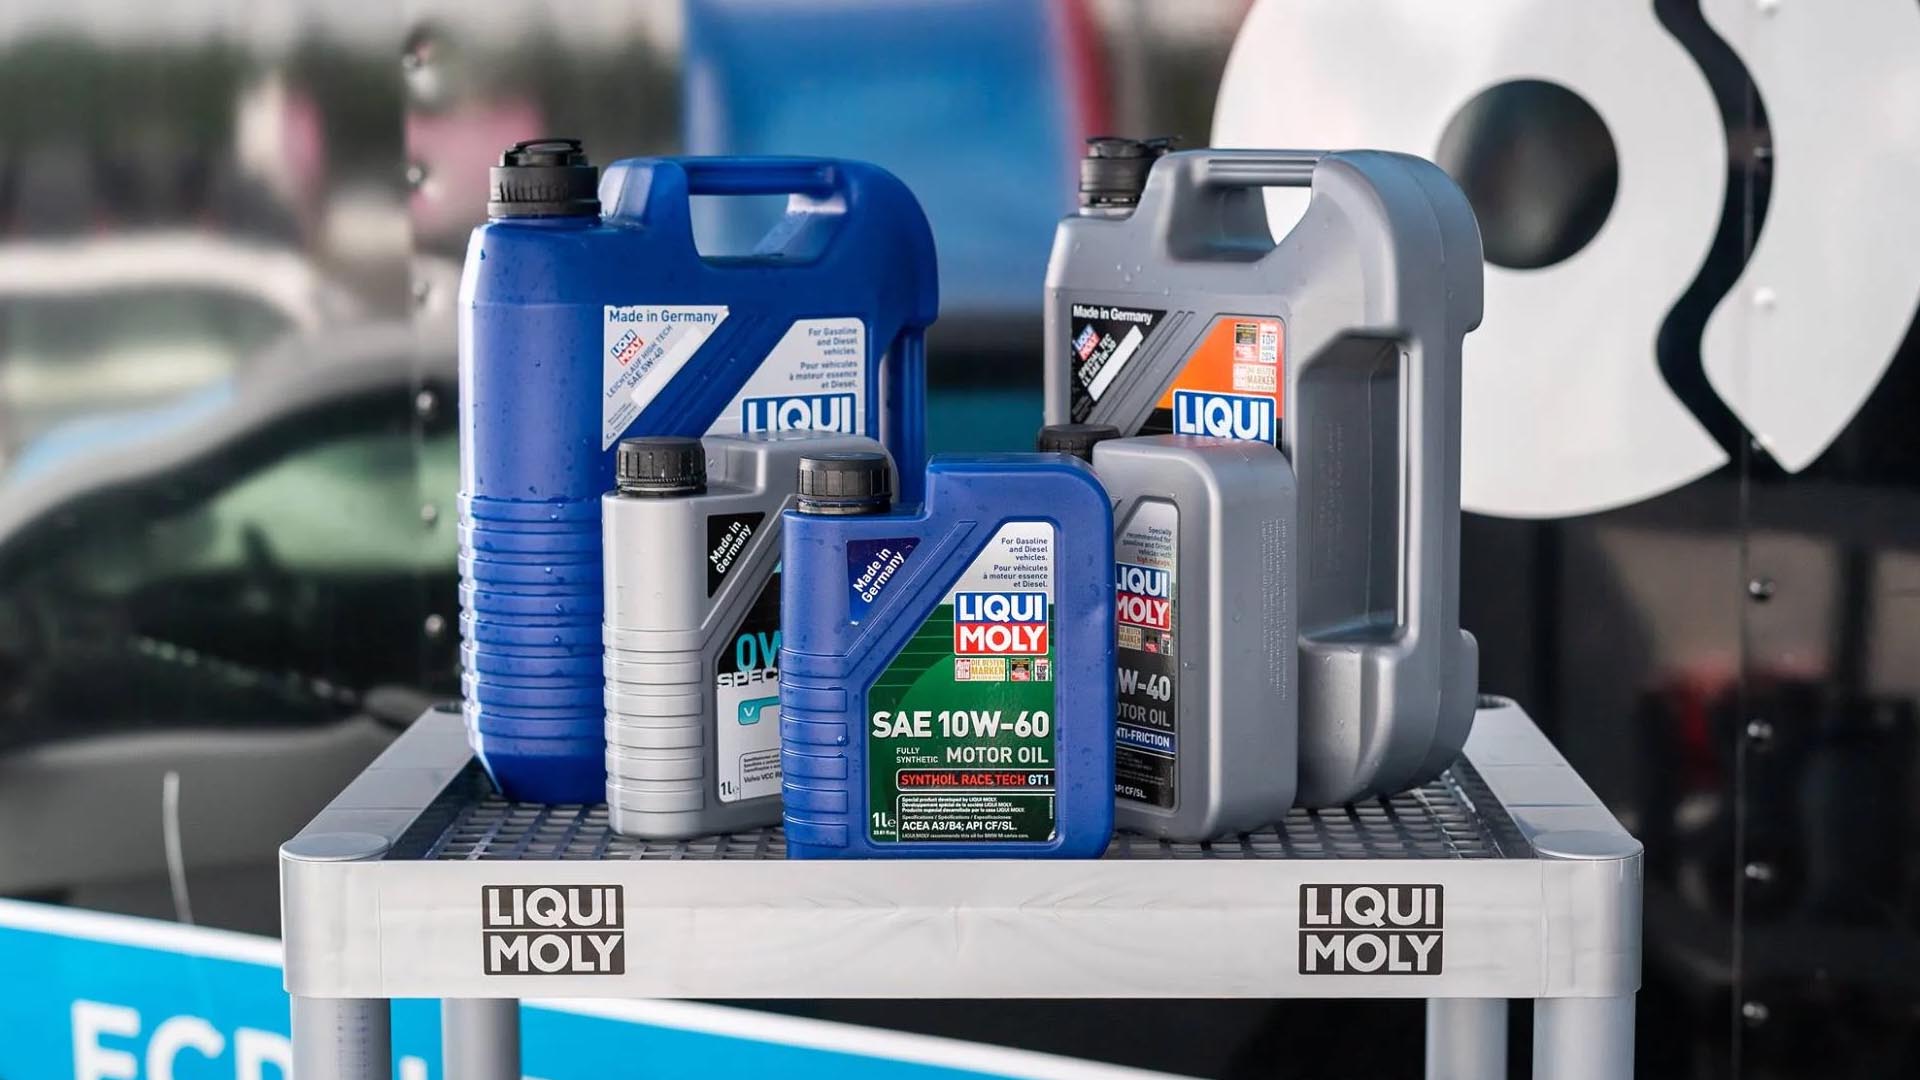 Here's Why LIQUI MOLY Actually Works